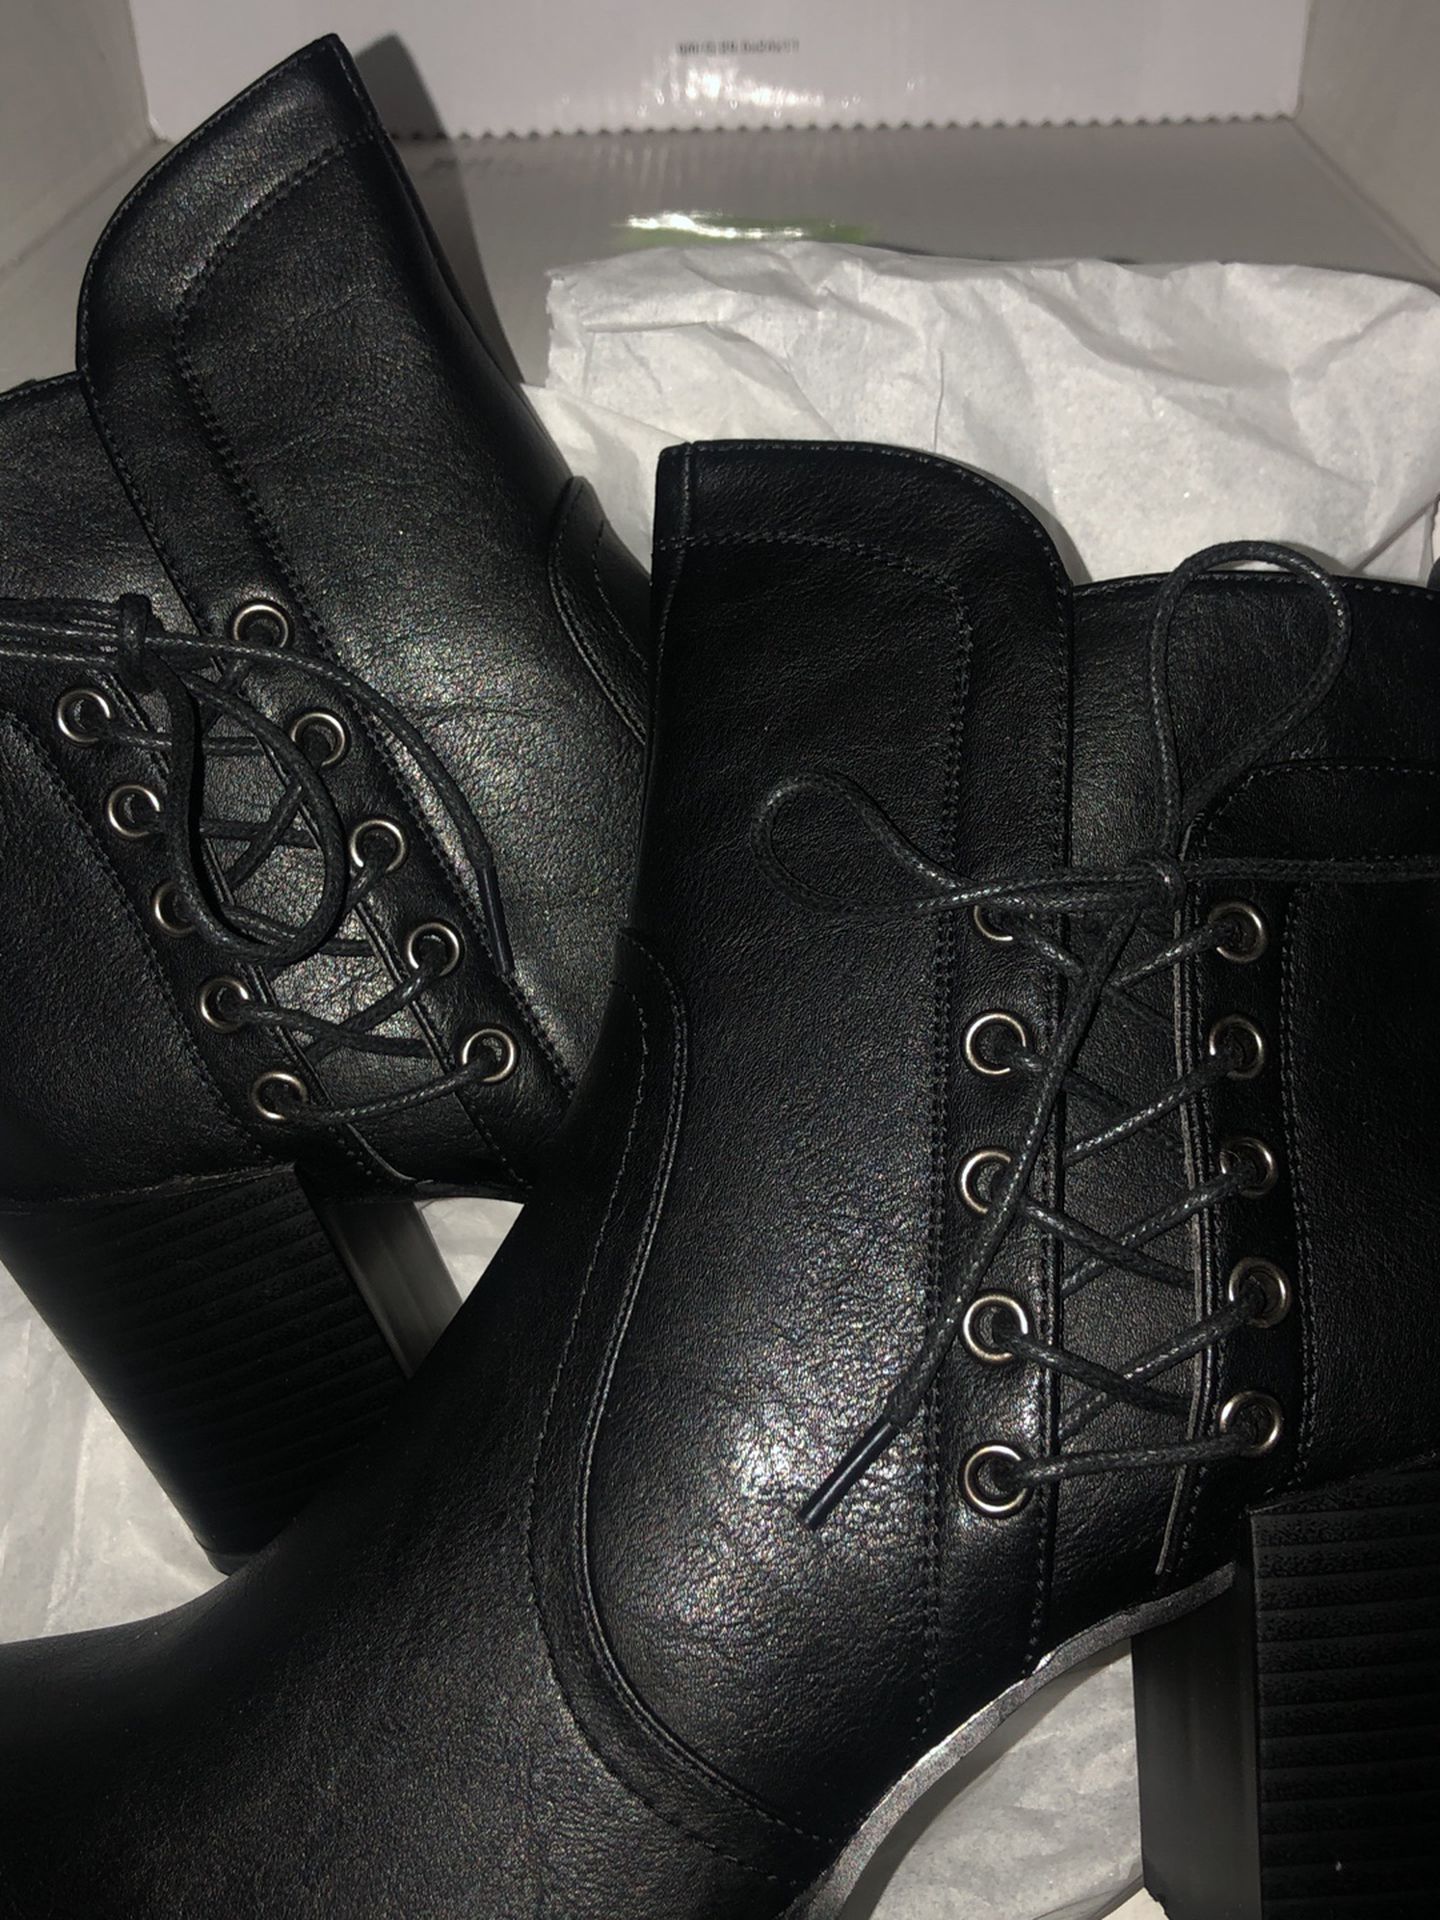 Black Boots Brand New Size 10